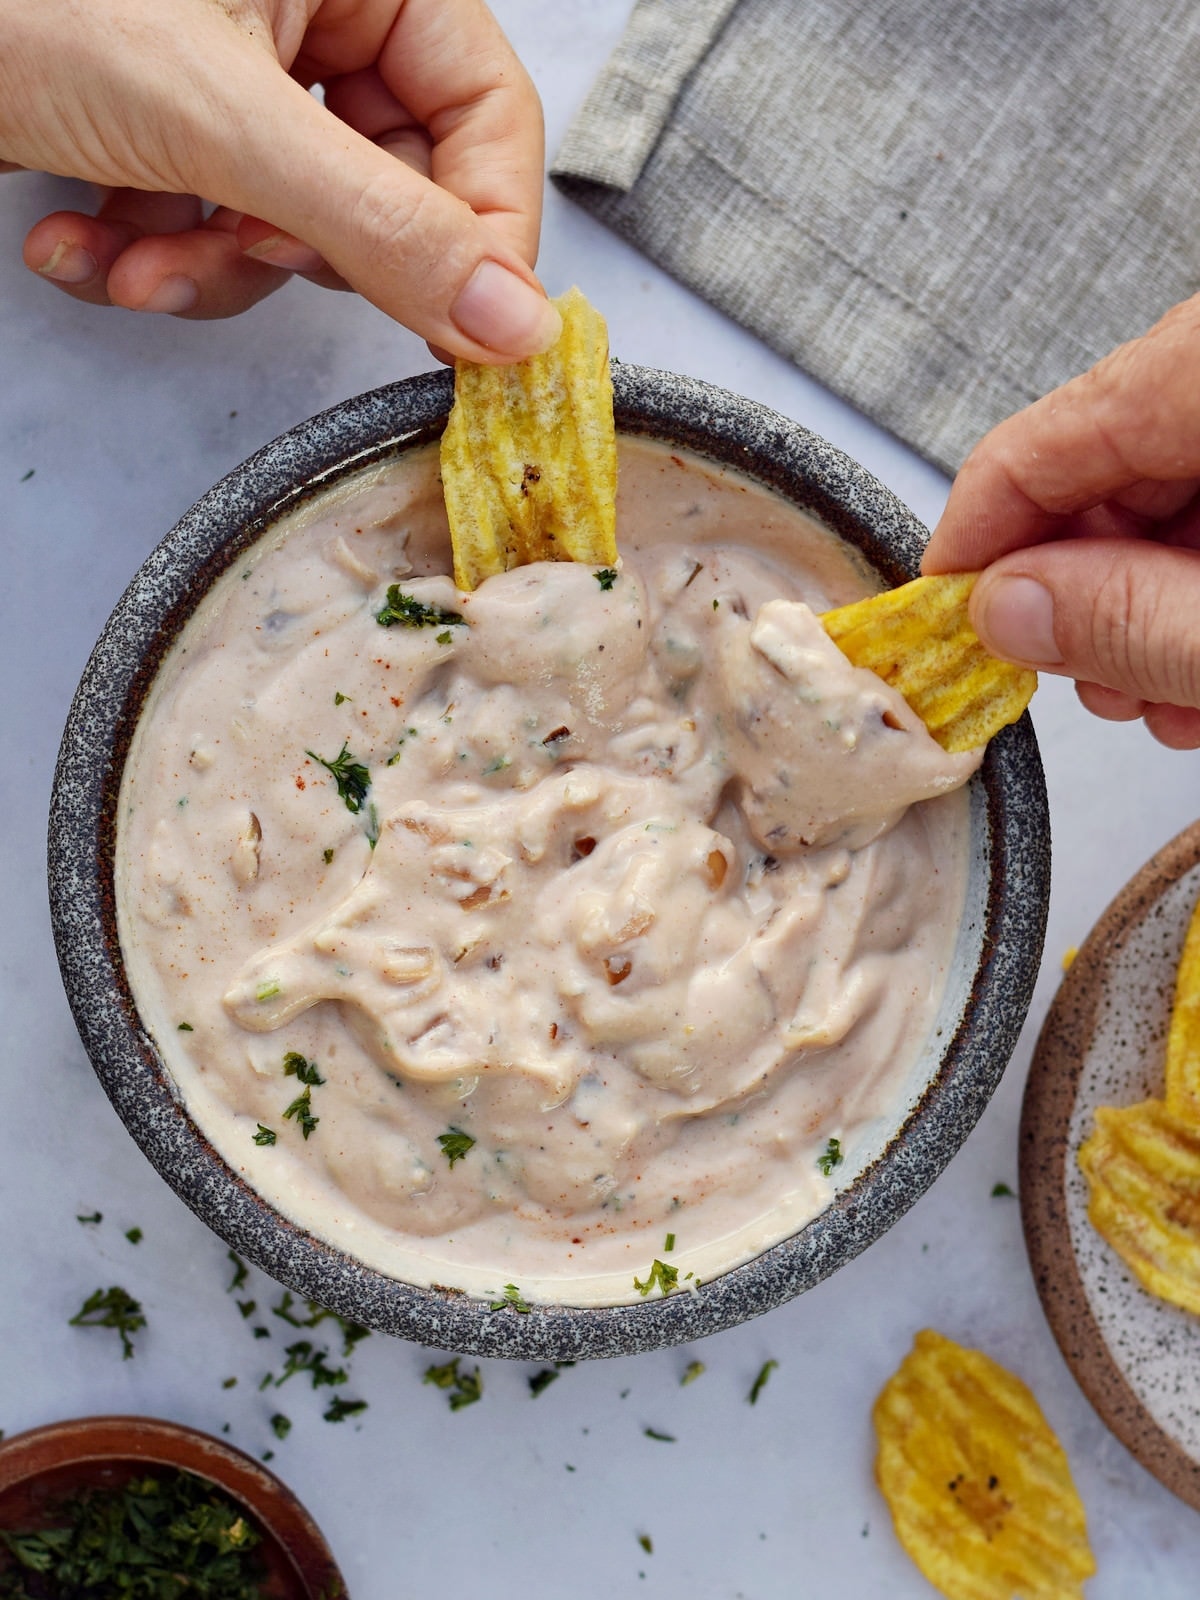 Two hands holding a chip dipped in sour cream dip with caramelized onions